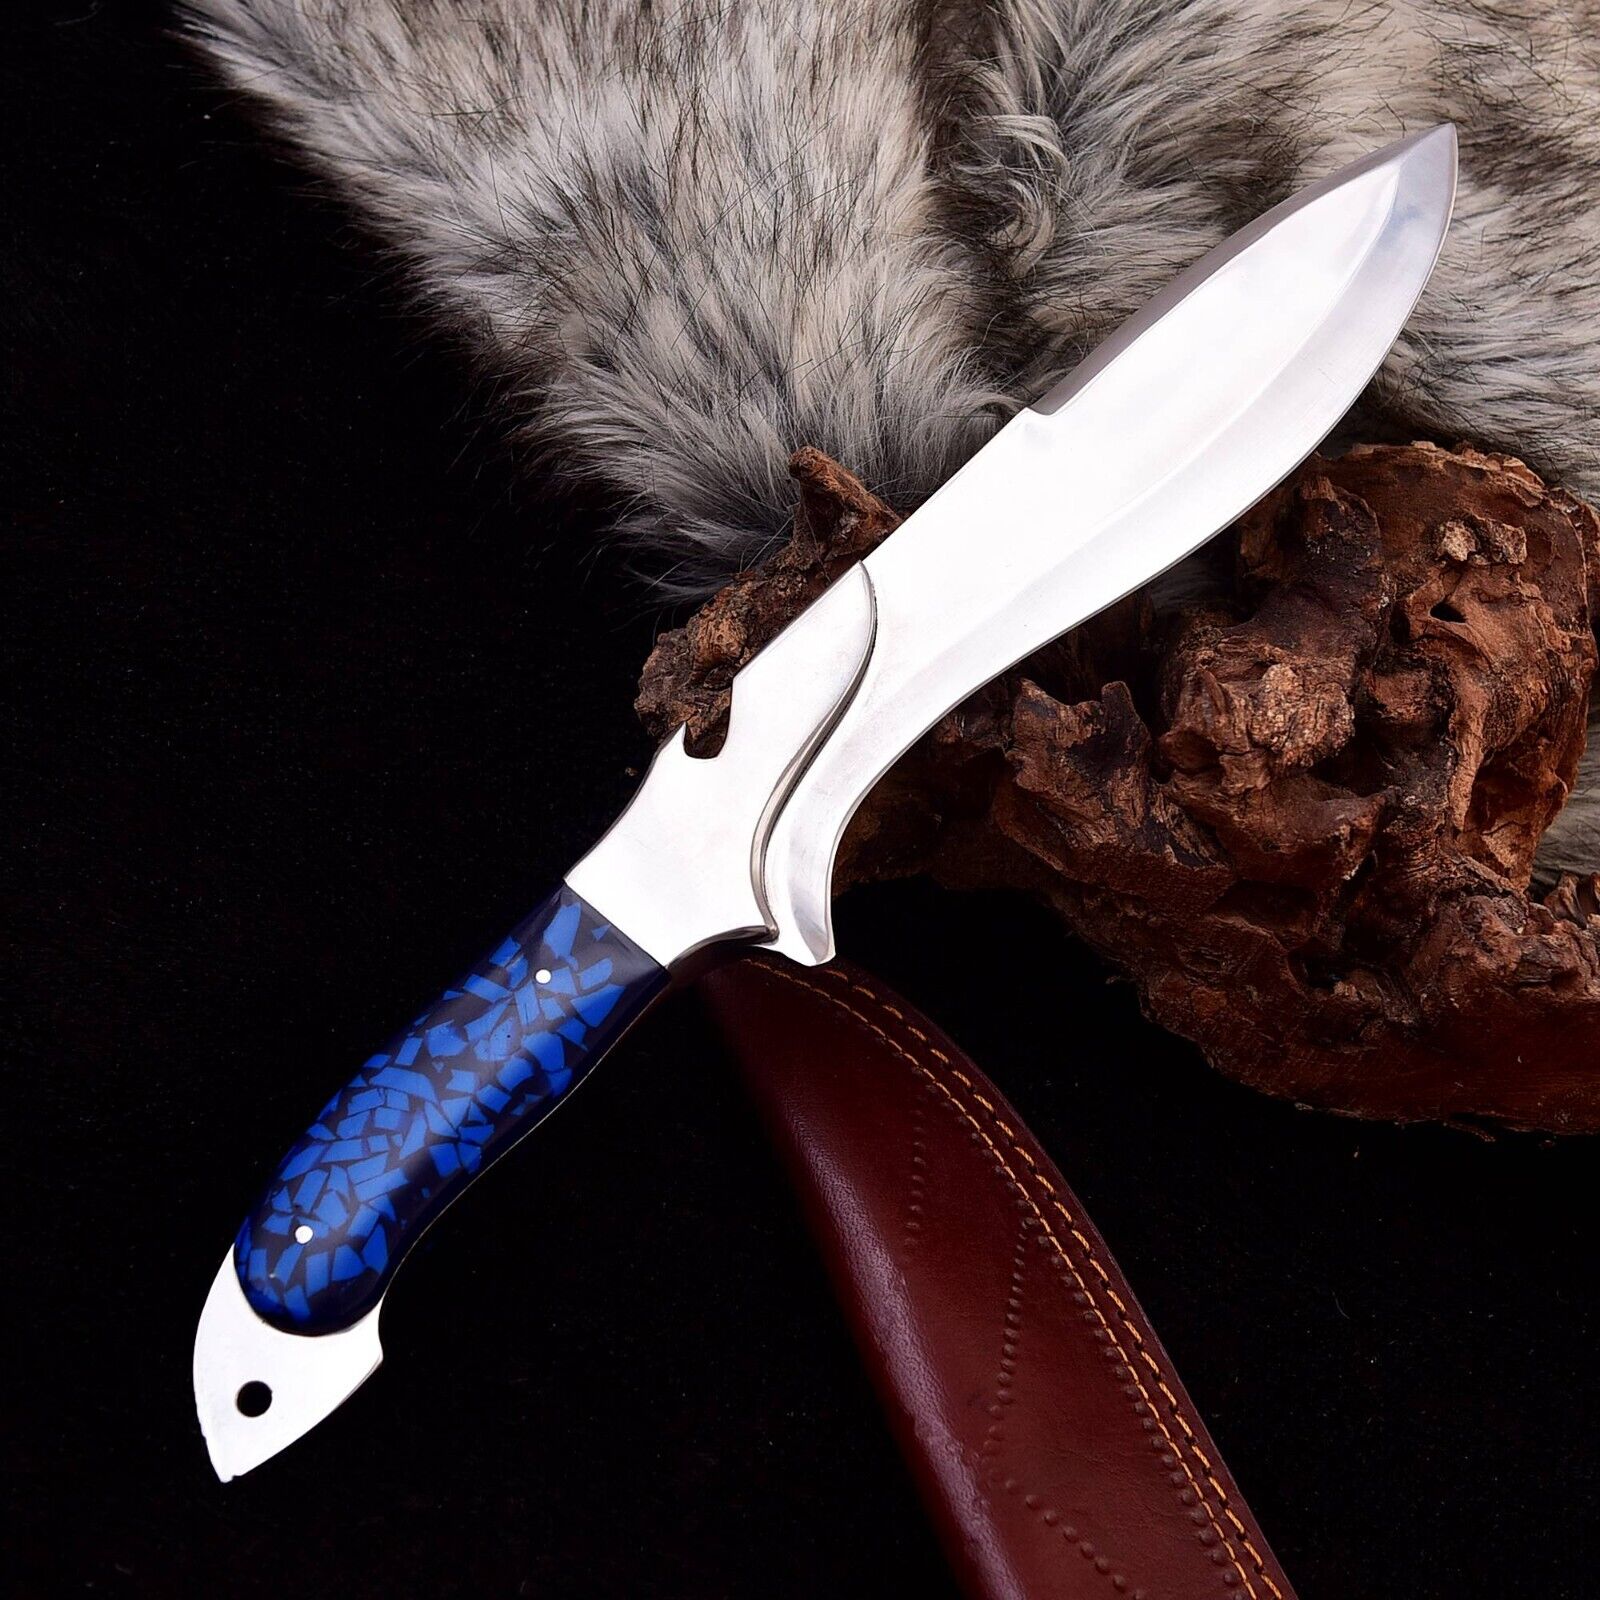 Forged Knife, Fixed Blade Knife, Handmade, Steel Knife, Hunting Gear, Best Gift